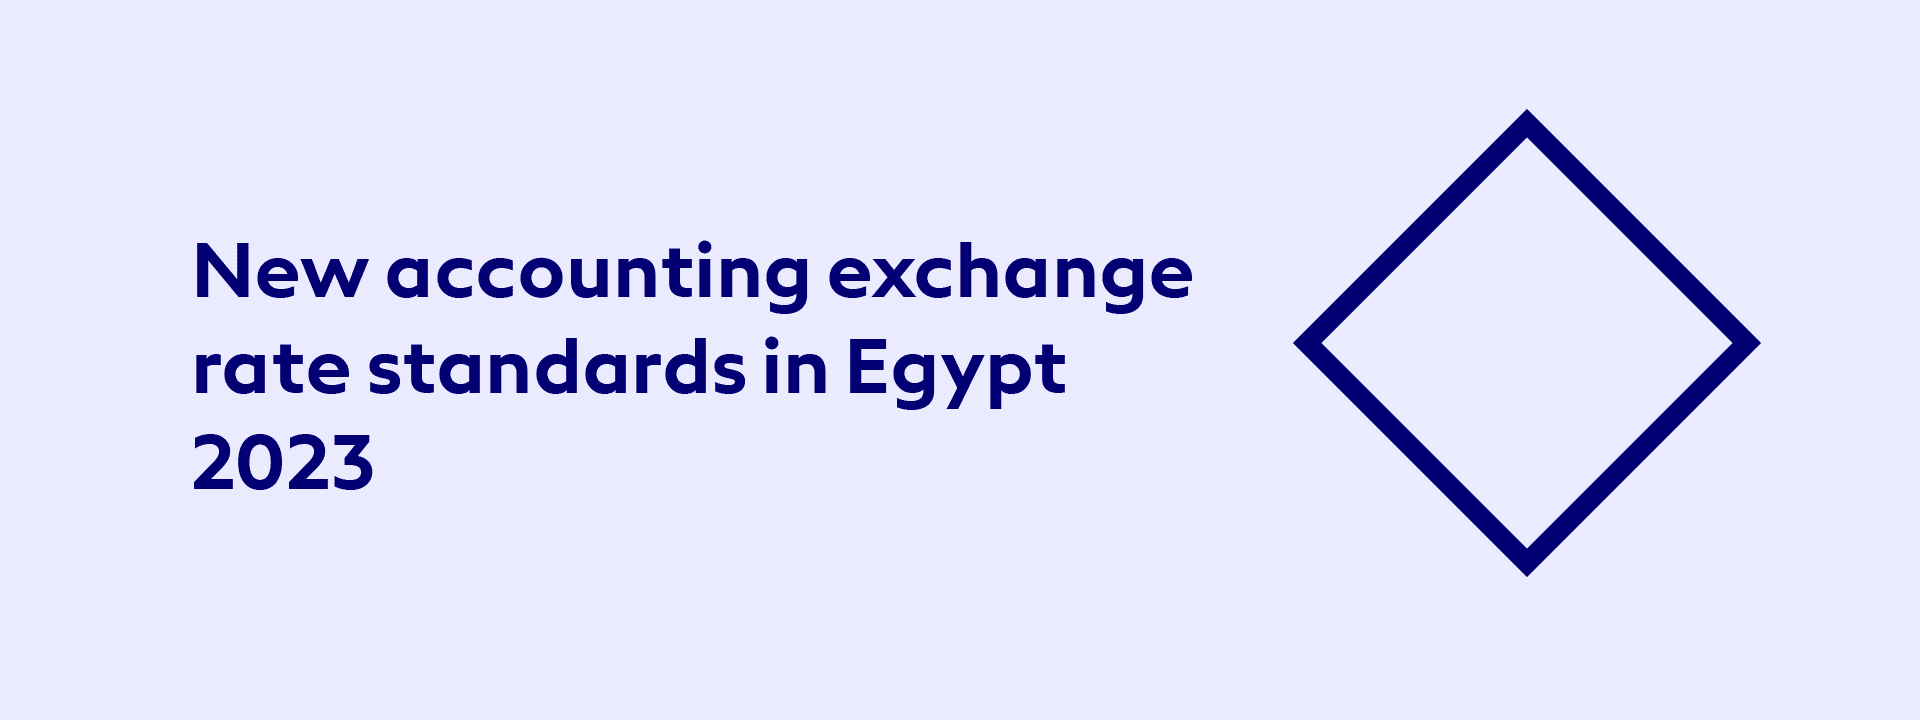 New accounting exchange rate standards in Egypt 2023